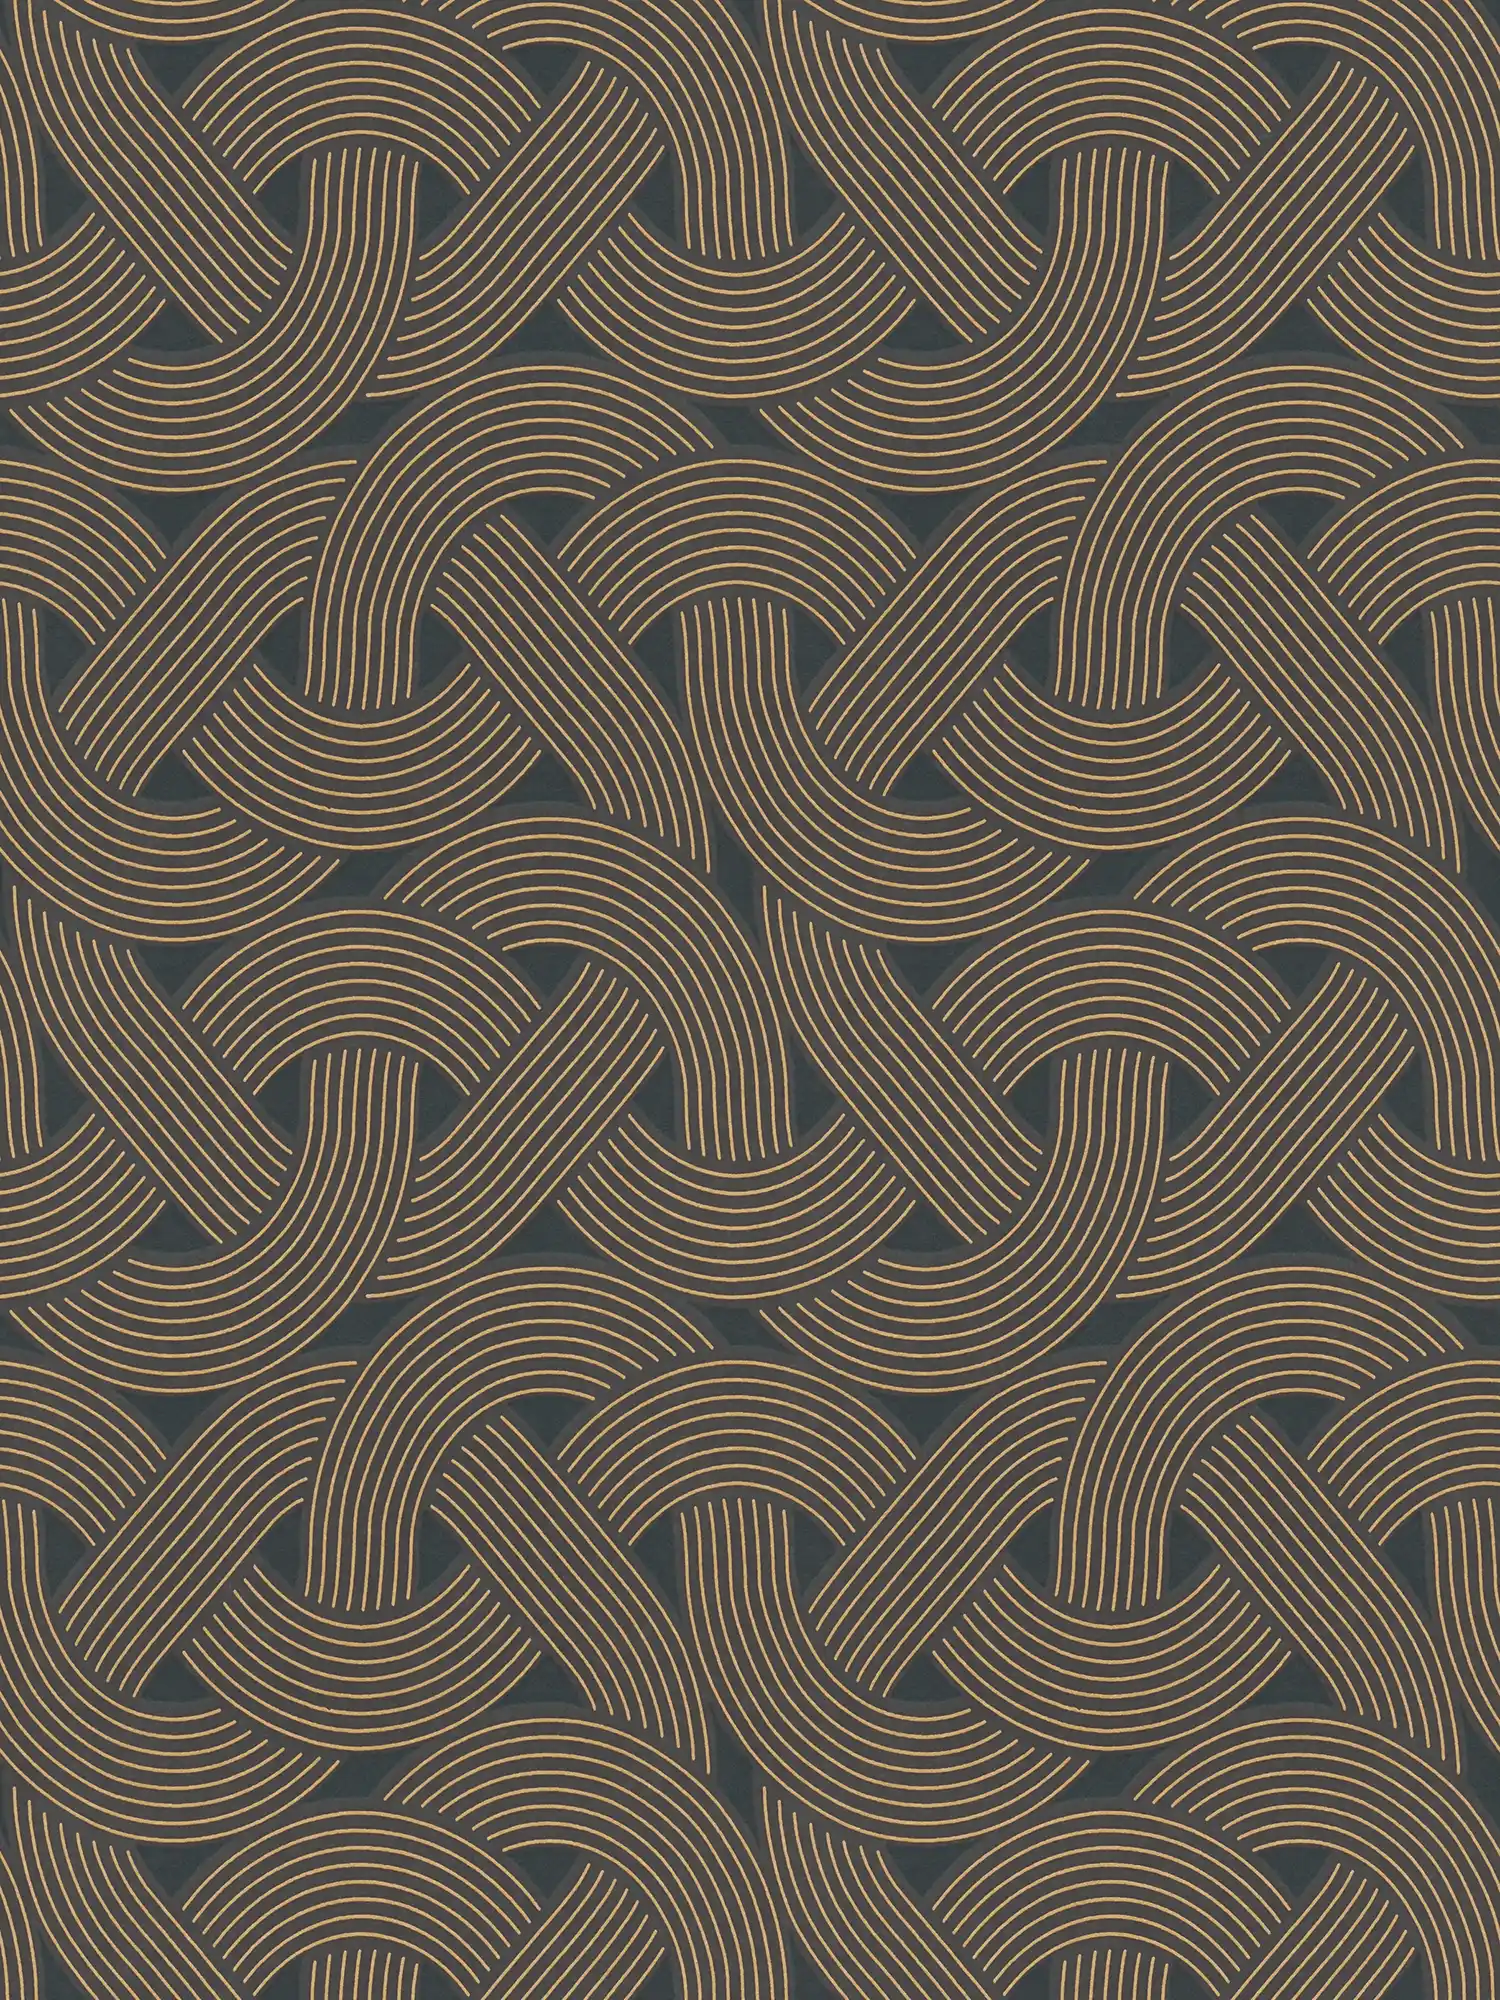         Non-woven wallpaper with line pattern in art deco style - black, gold
    